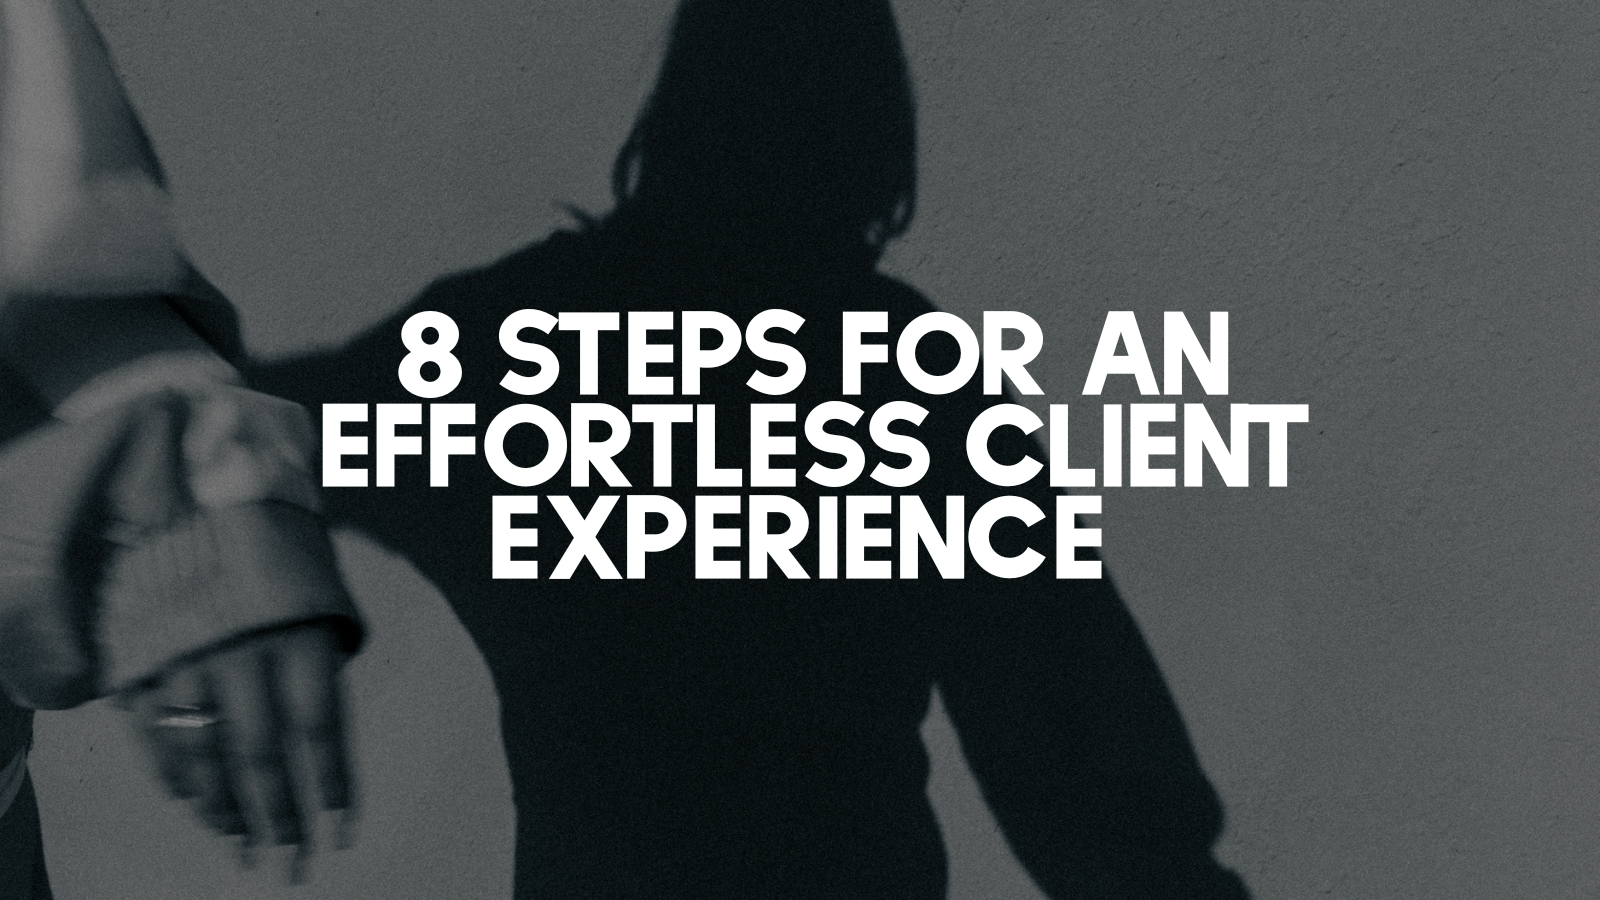 8 steps for an effortless client experience